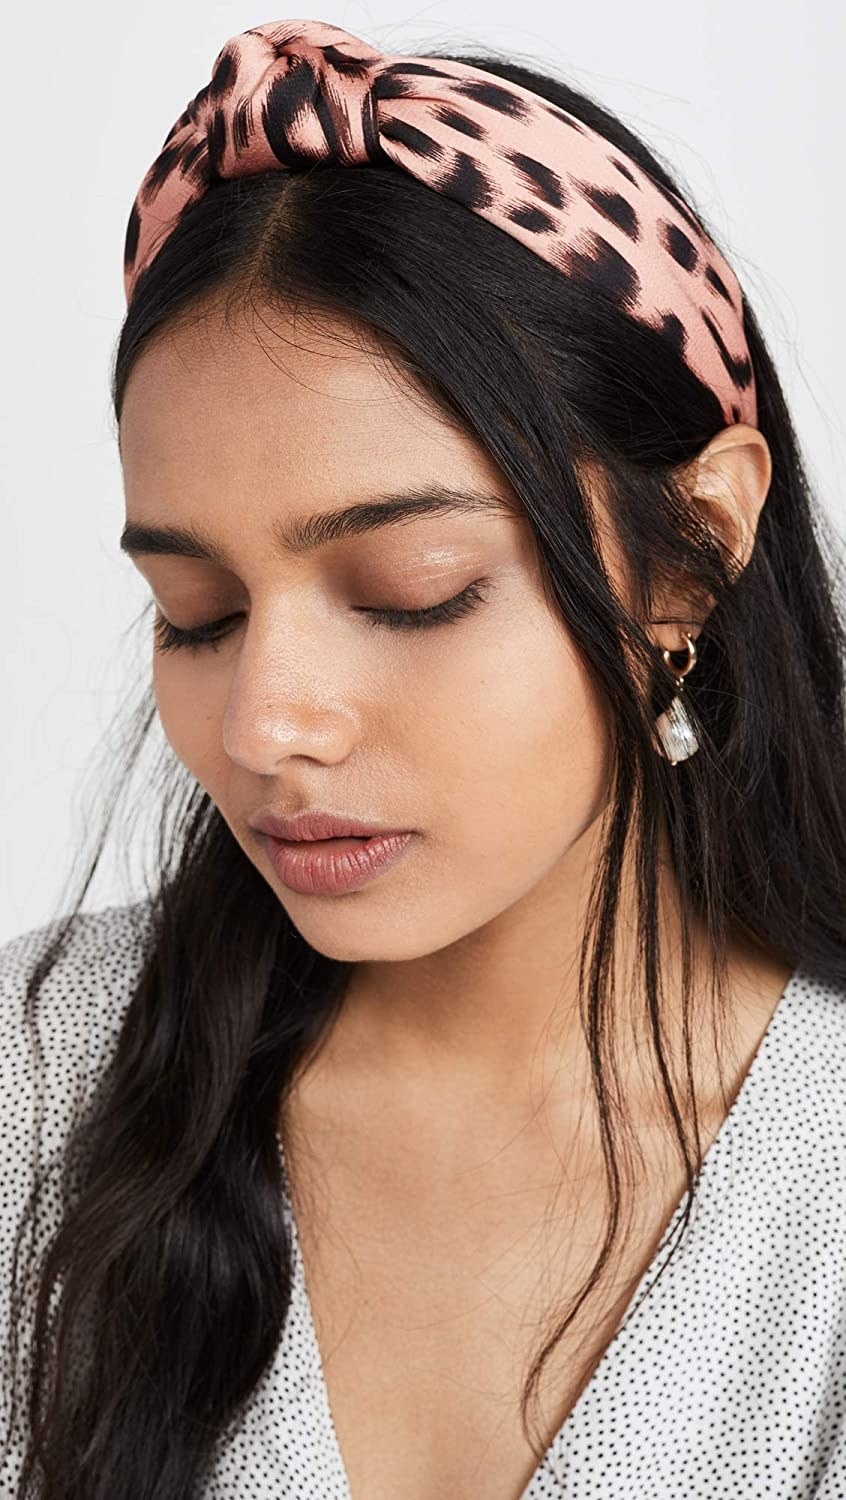 Model wearing the pink and black headband